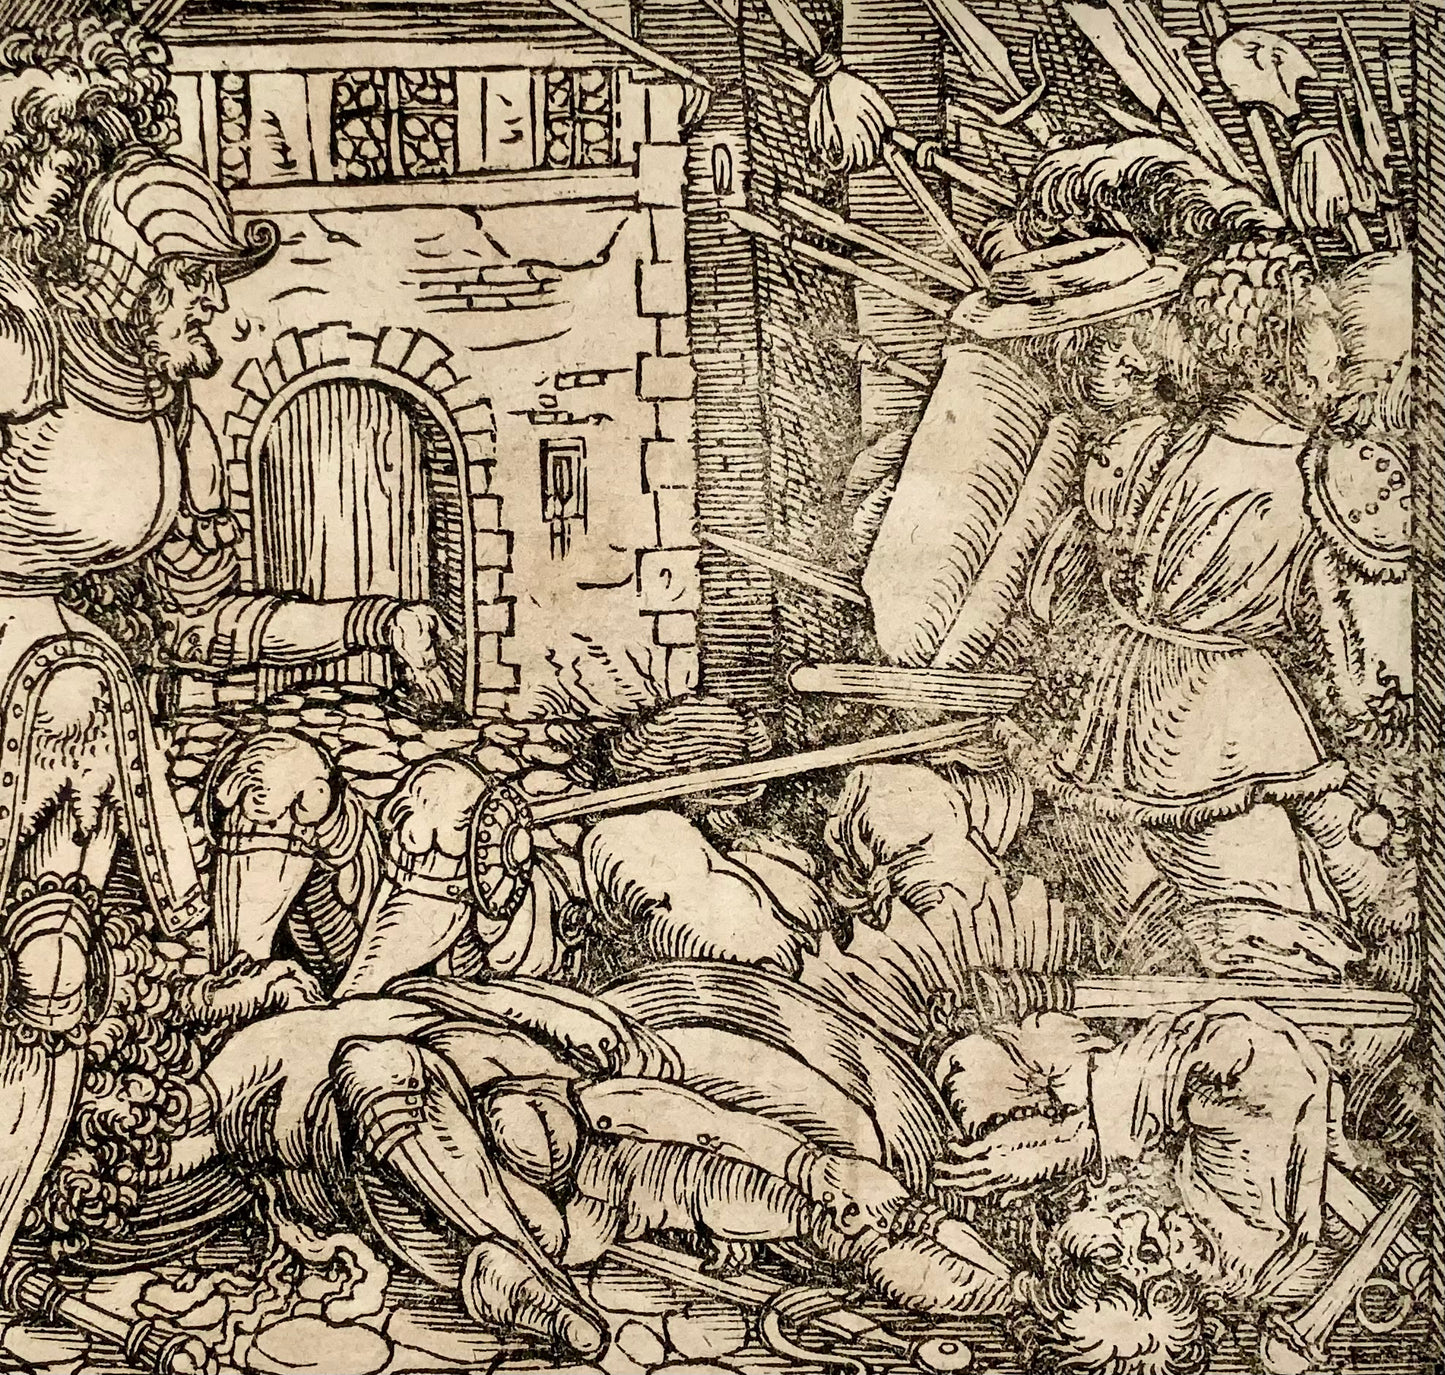 1532 Hans Weiditz, Battle with / Death of an Enemy, 2 master woodcuts